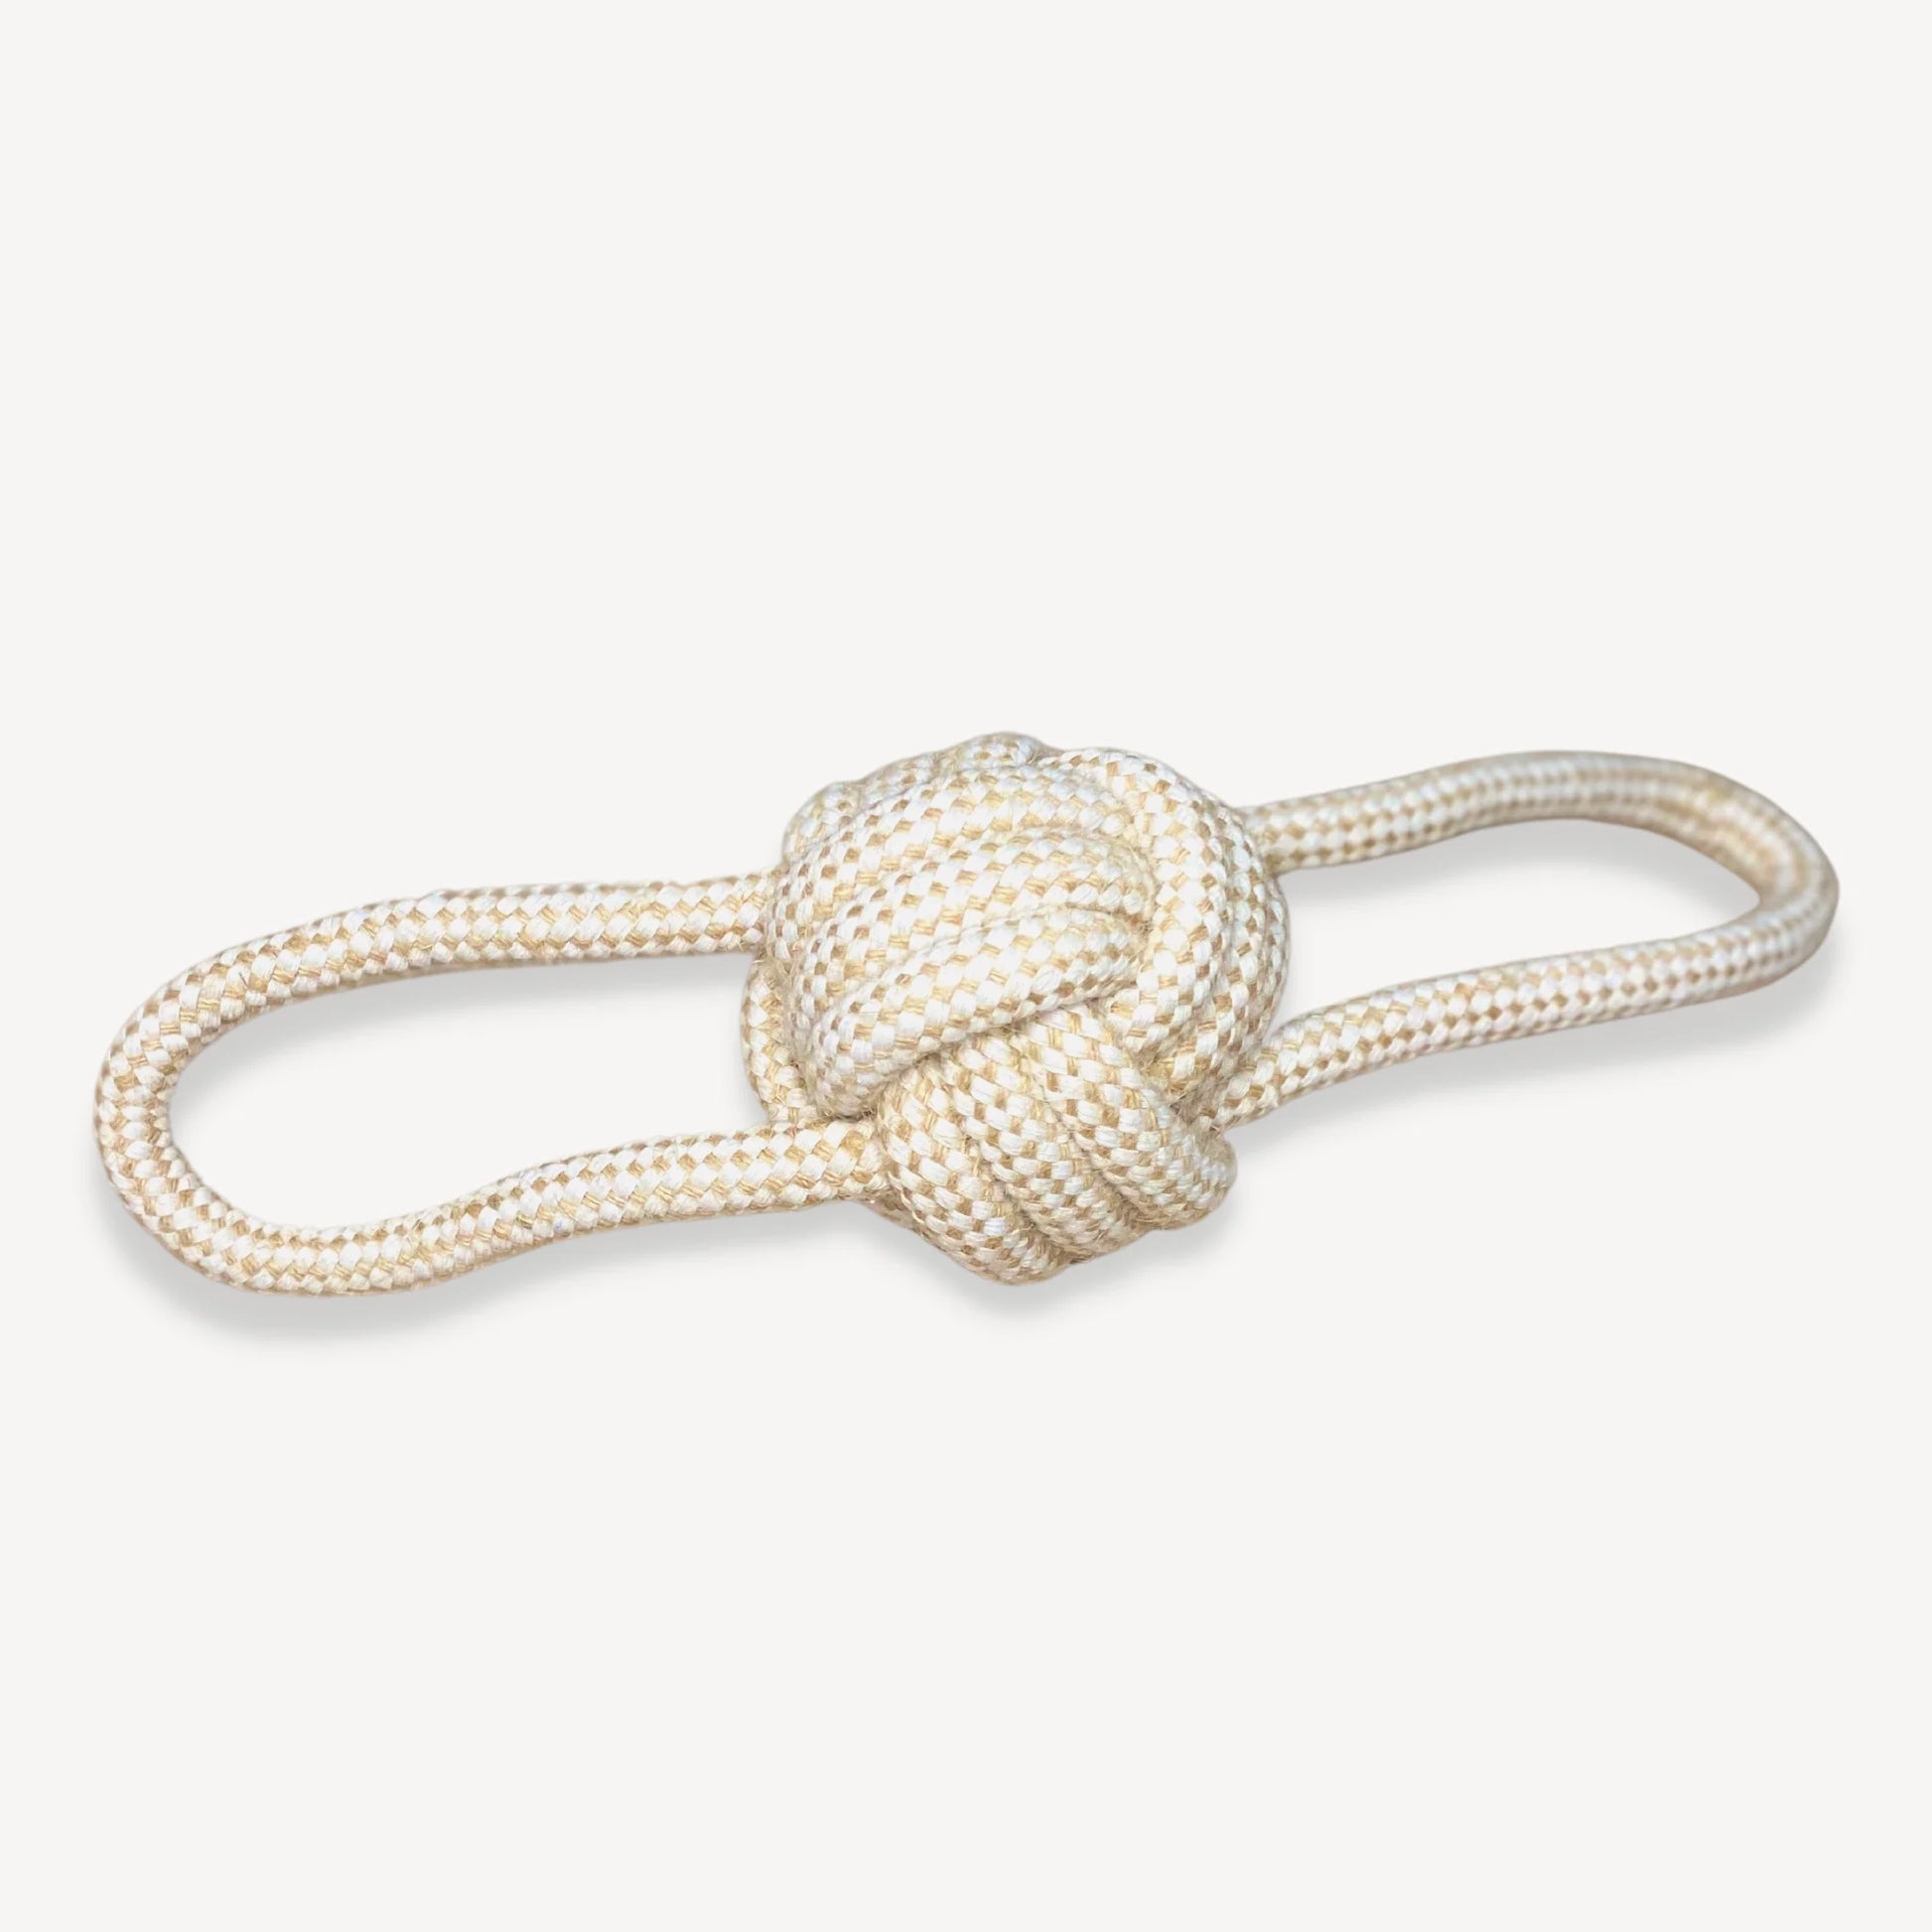 Rope Ball With 2 Handles